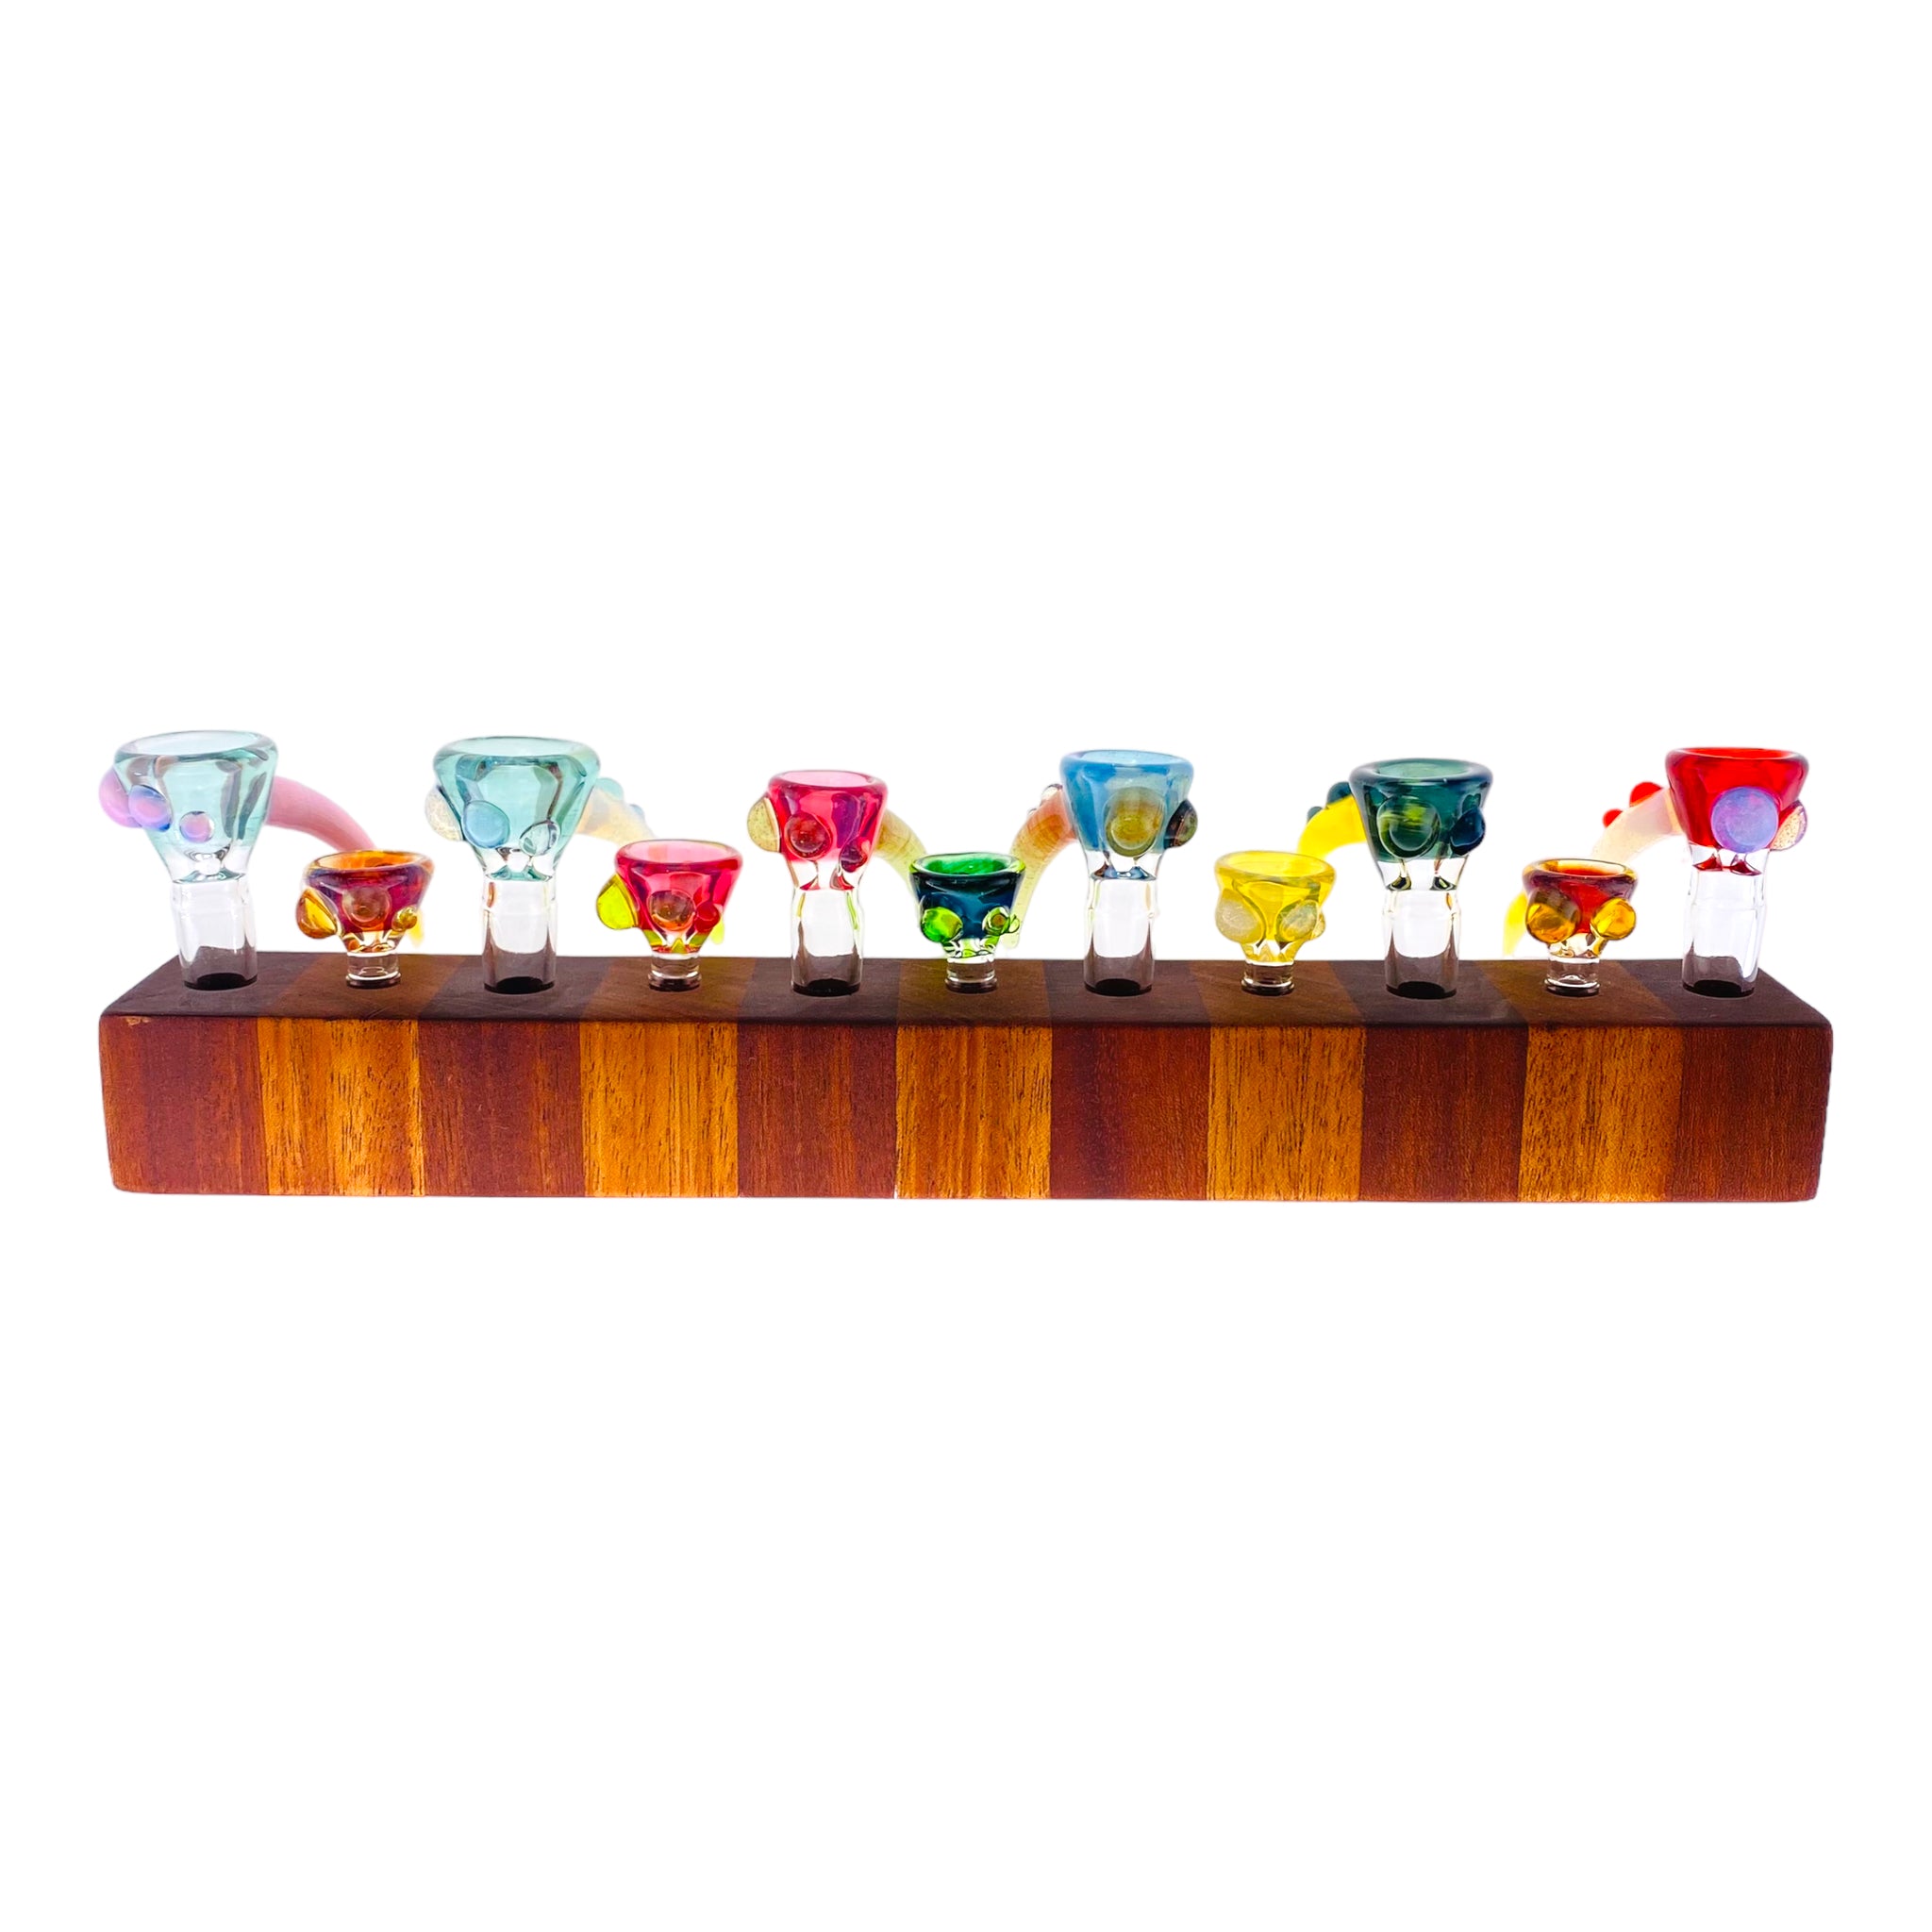 11 Hole Wood Display Stand Holder For 14mm And 10mm Bong Bowl Pieces Or Quartz Bangers - Butcher Block